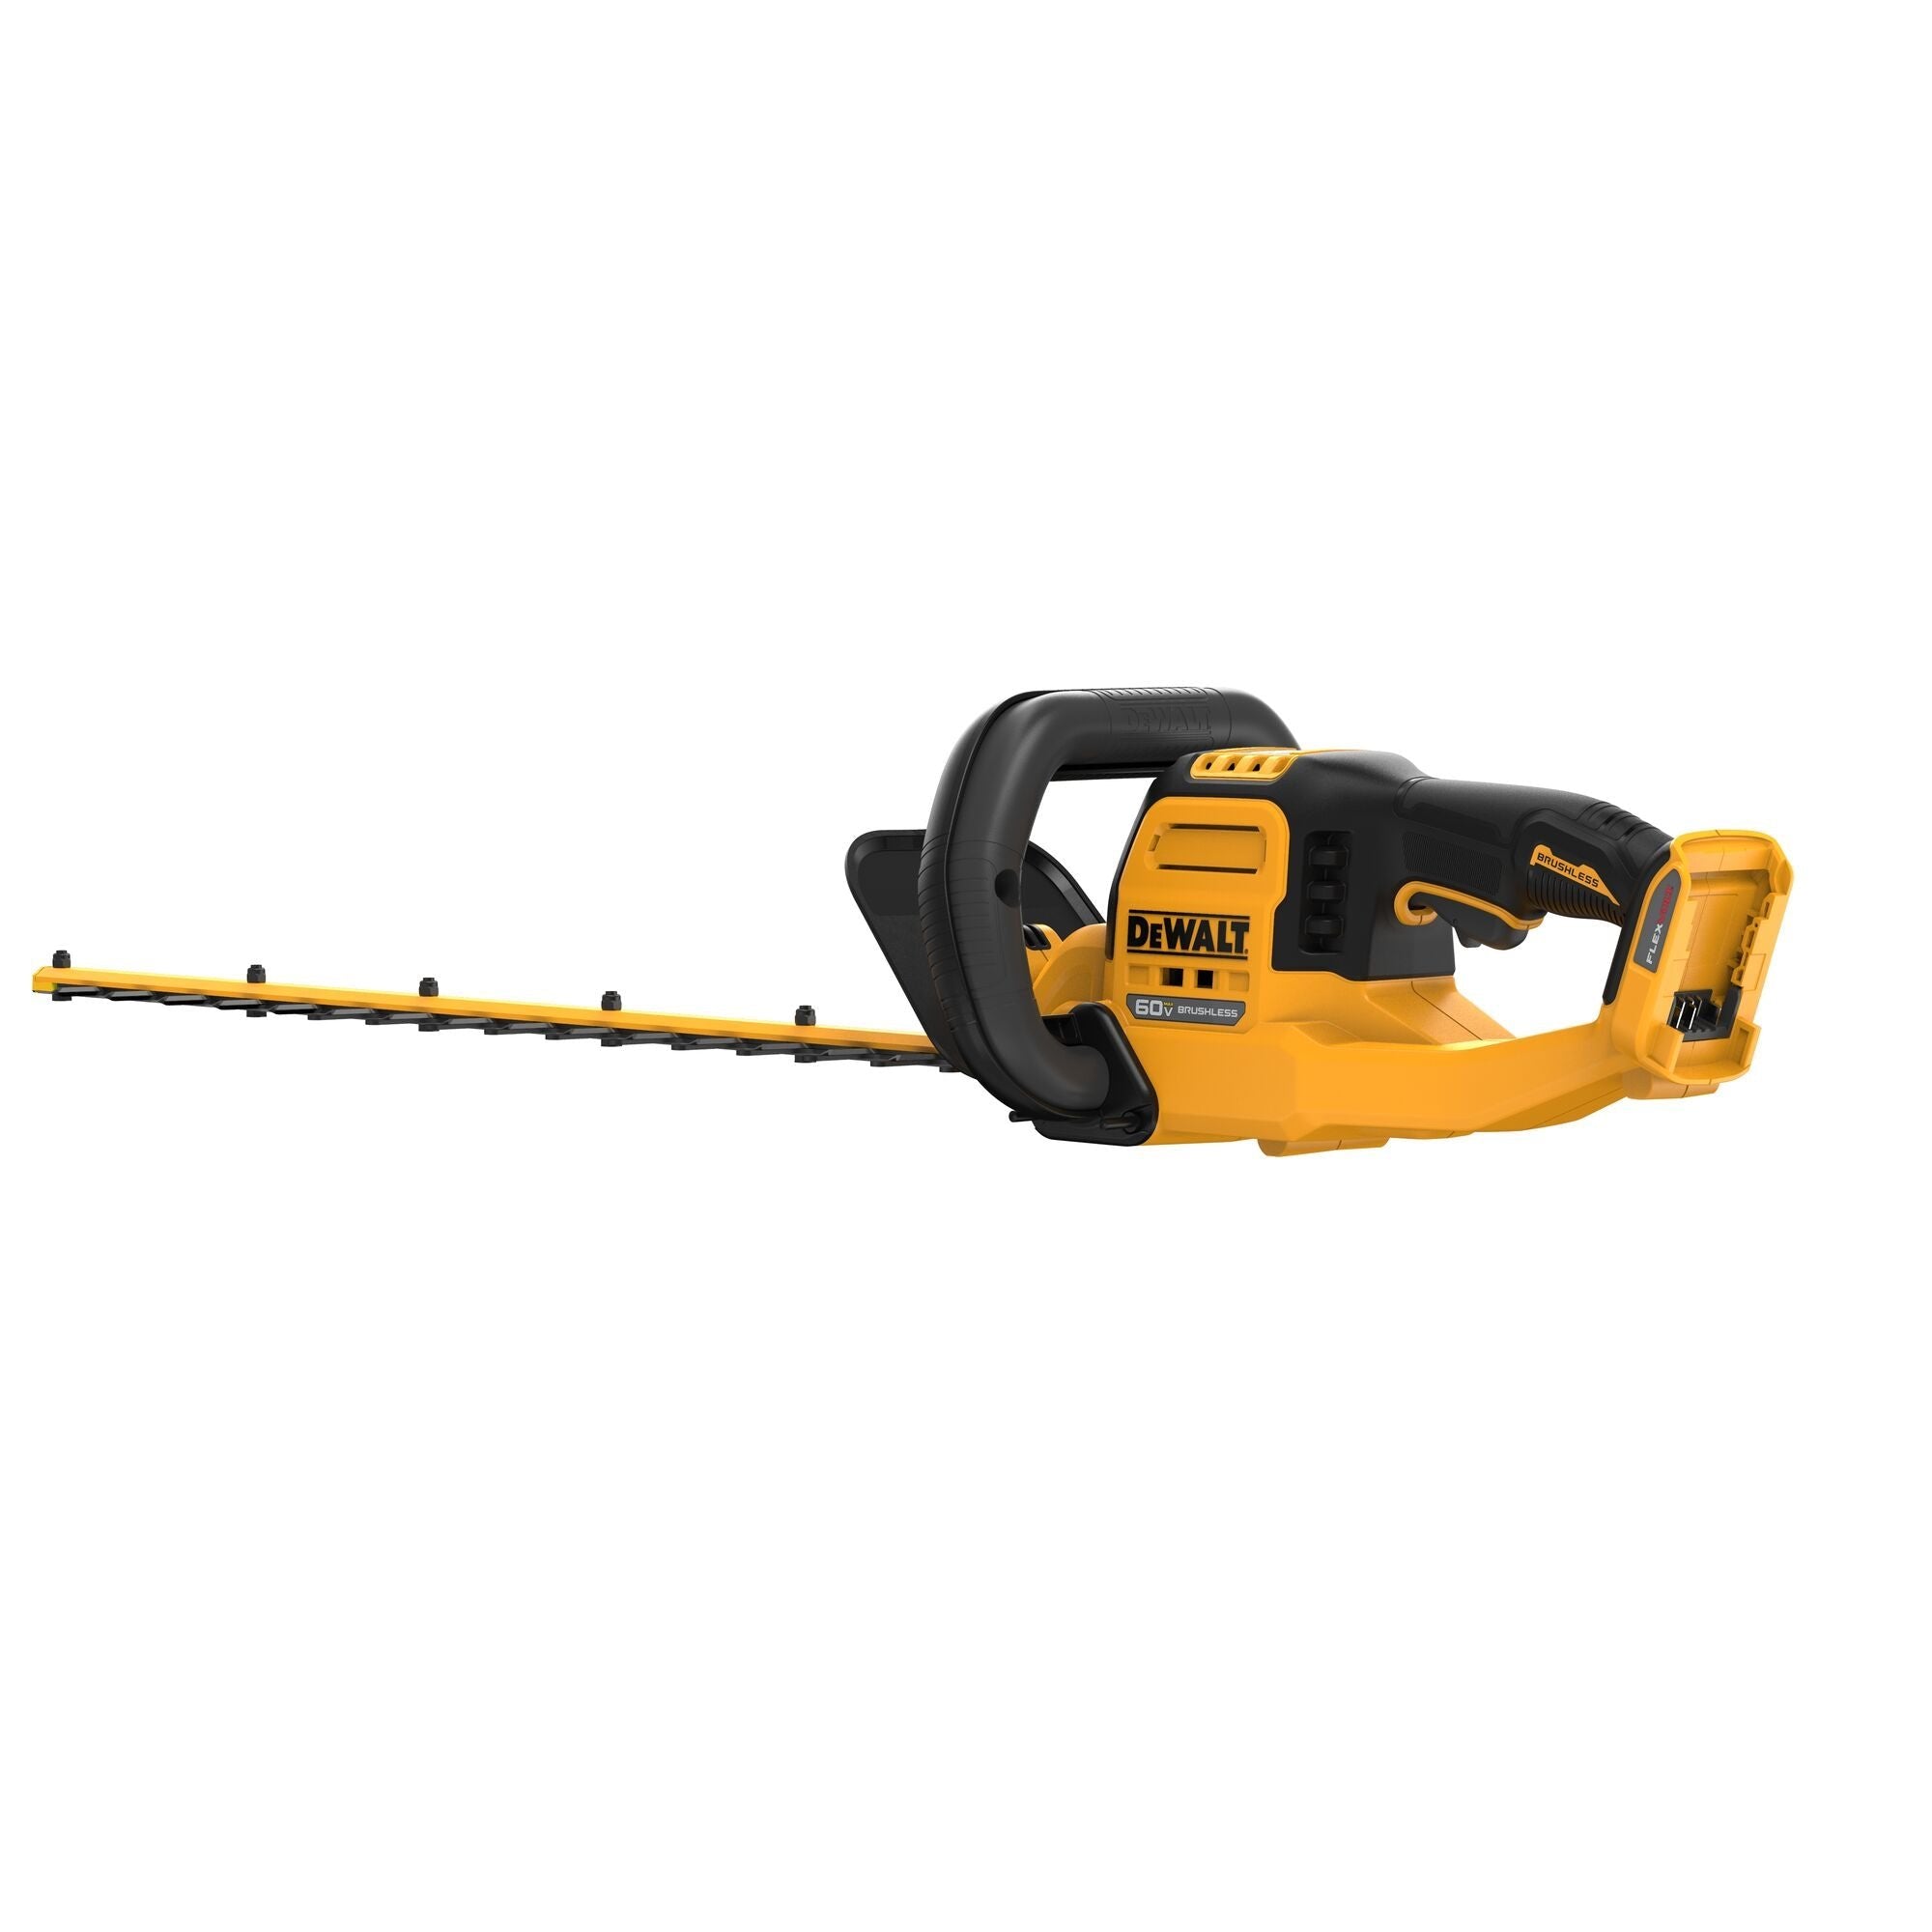 Dewalt DCHT870B 60V MAX* 26 in. Brushless Cordless Hedge Trimmer (Tool Only)